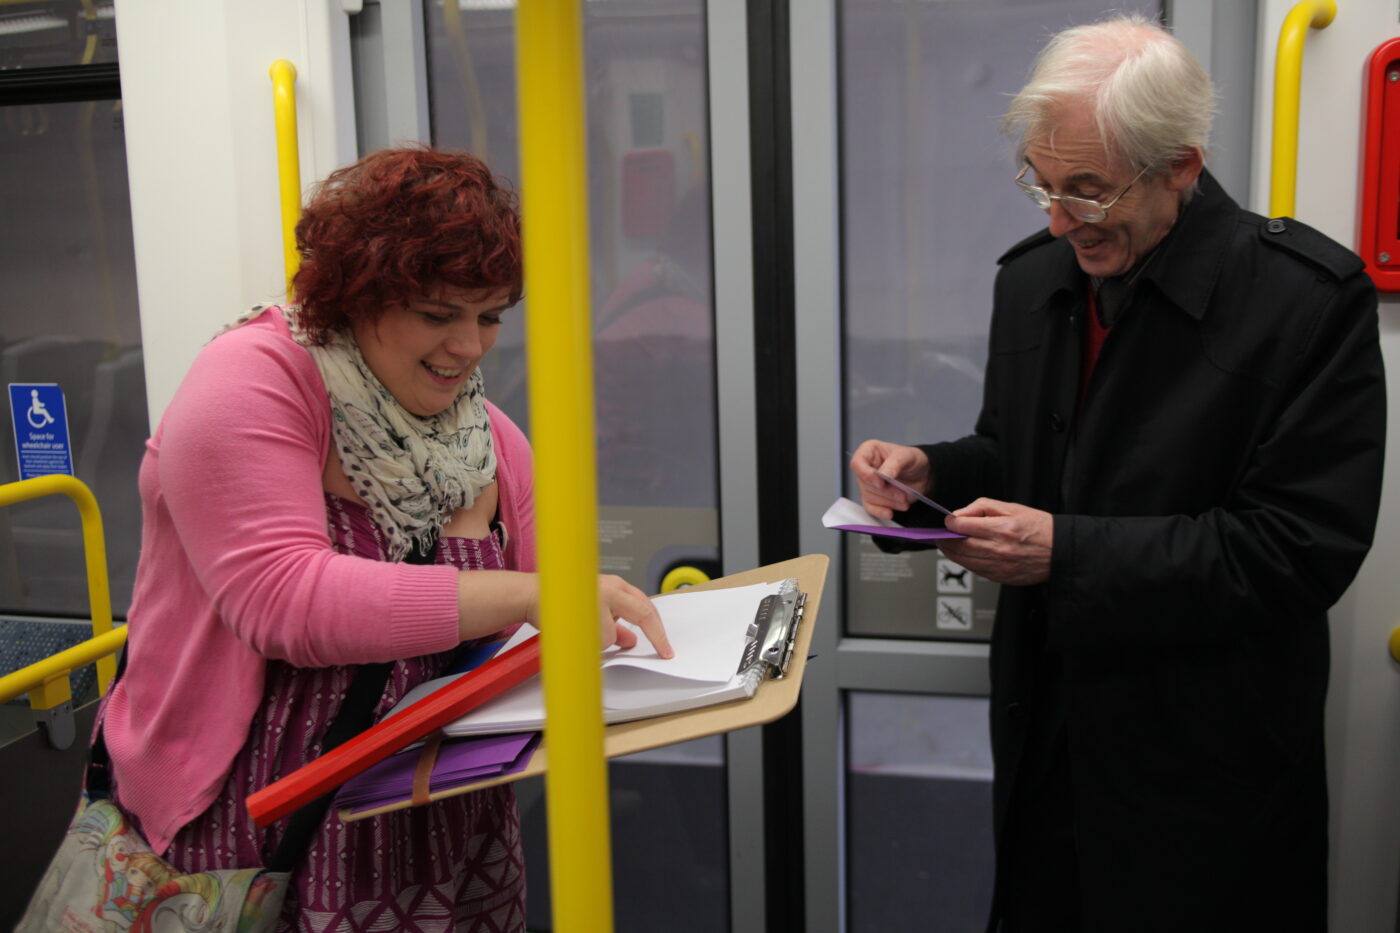 Sarah is on a tram looking at a clipboard and smiling. Next to her, a passenger holds a small card and smiles.